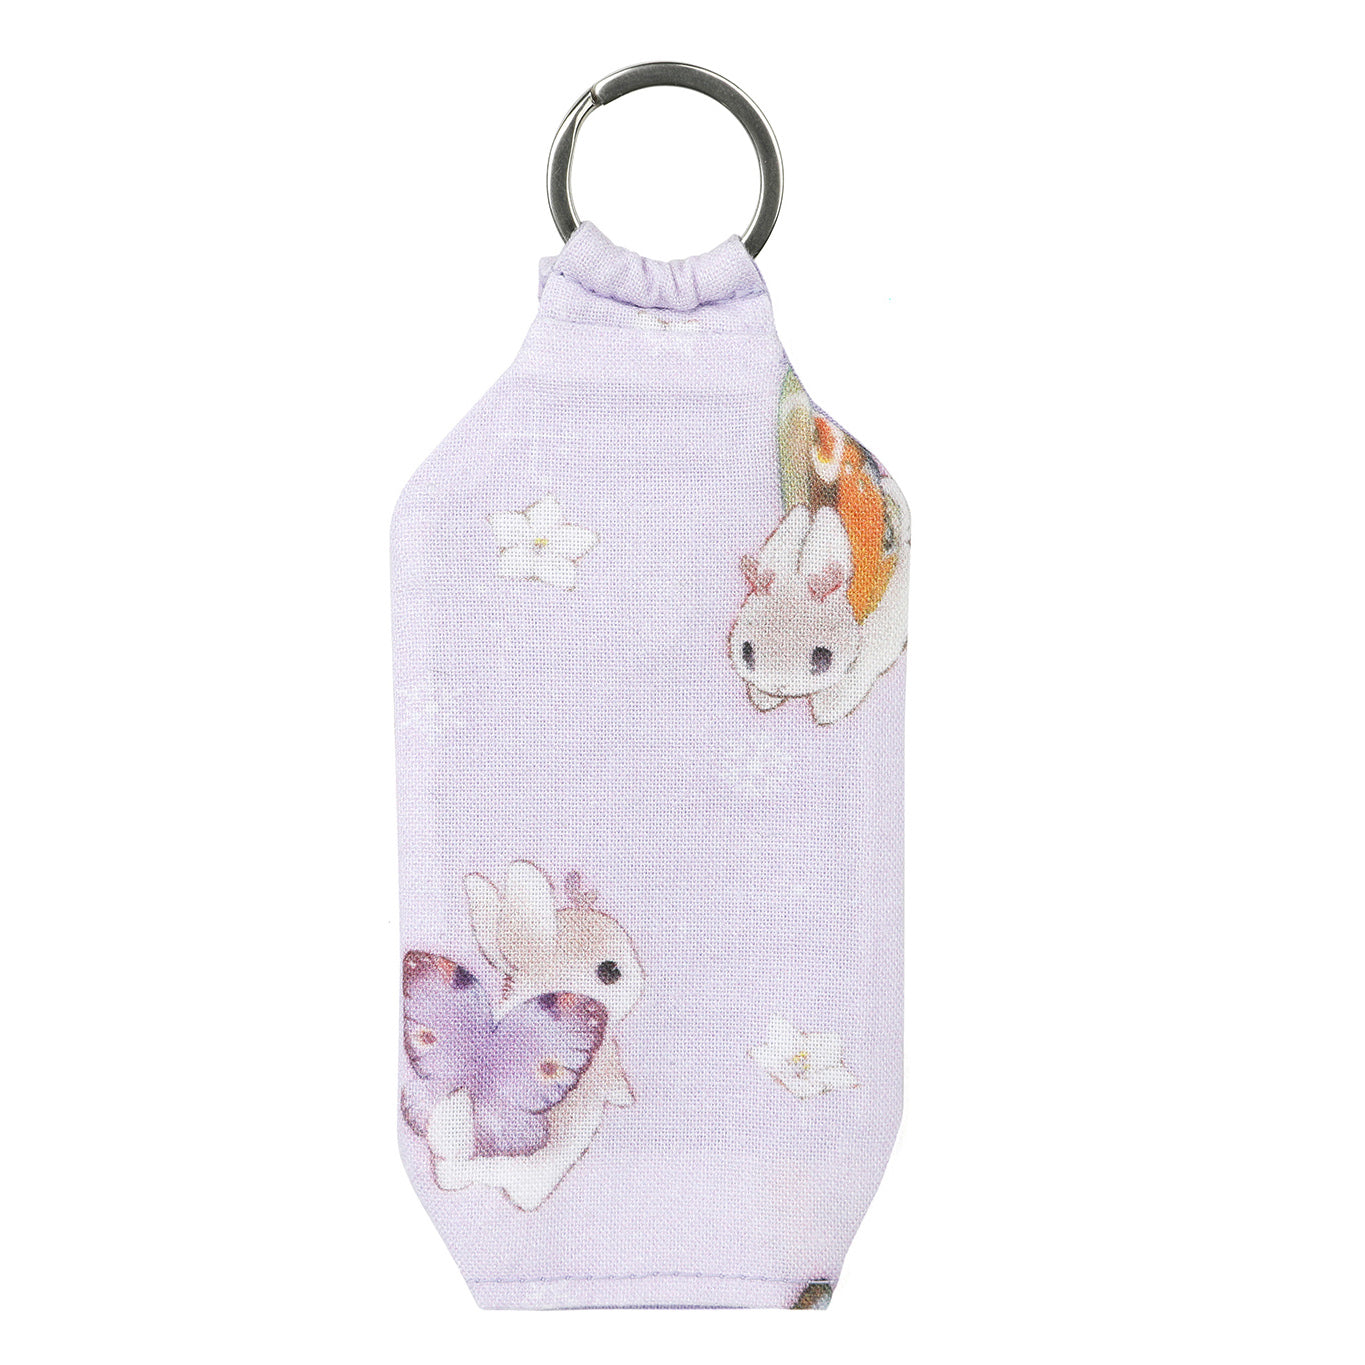 Back view of Closed purple bunnerfly hand sanitizer holder on white background.